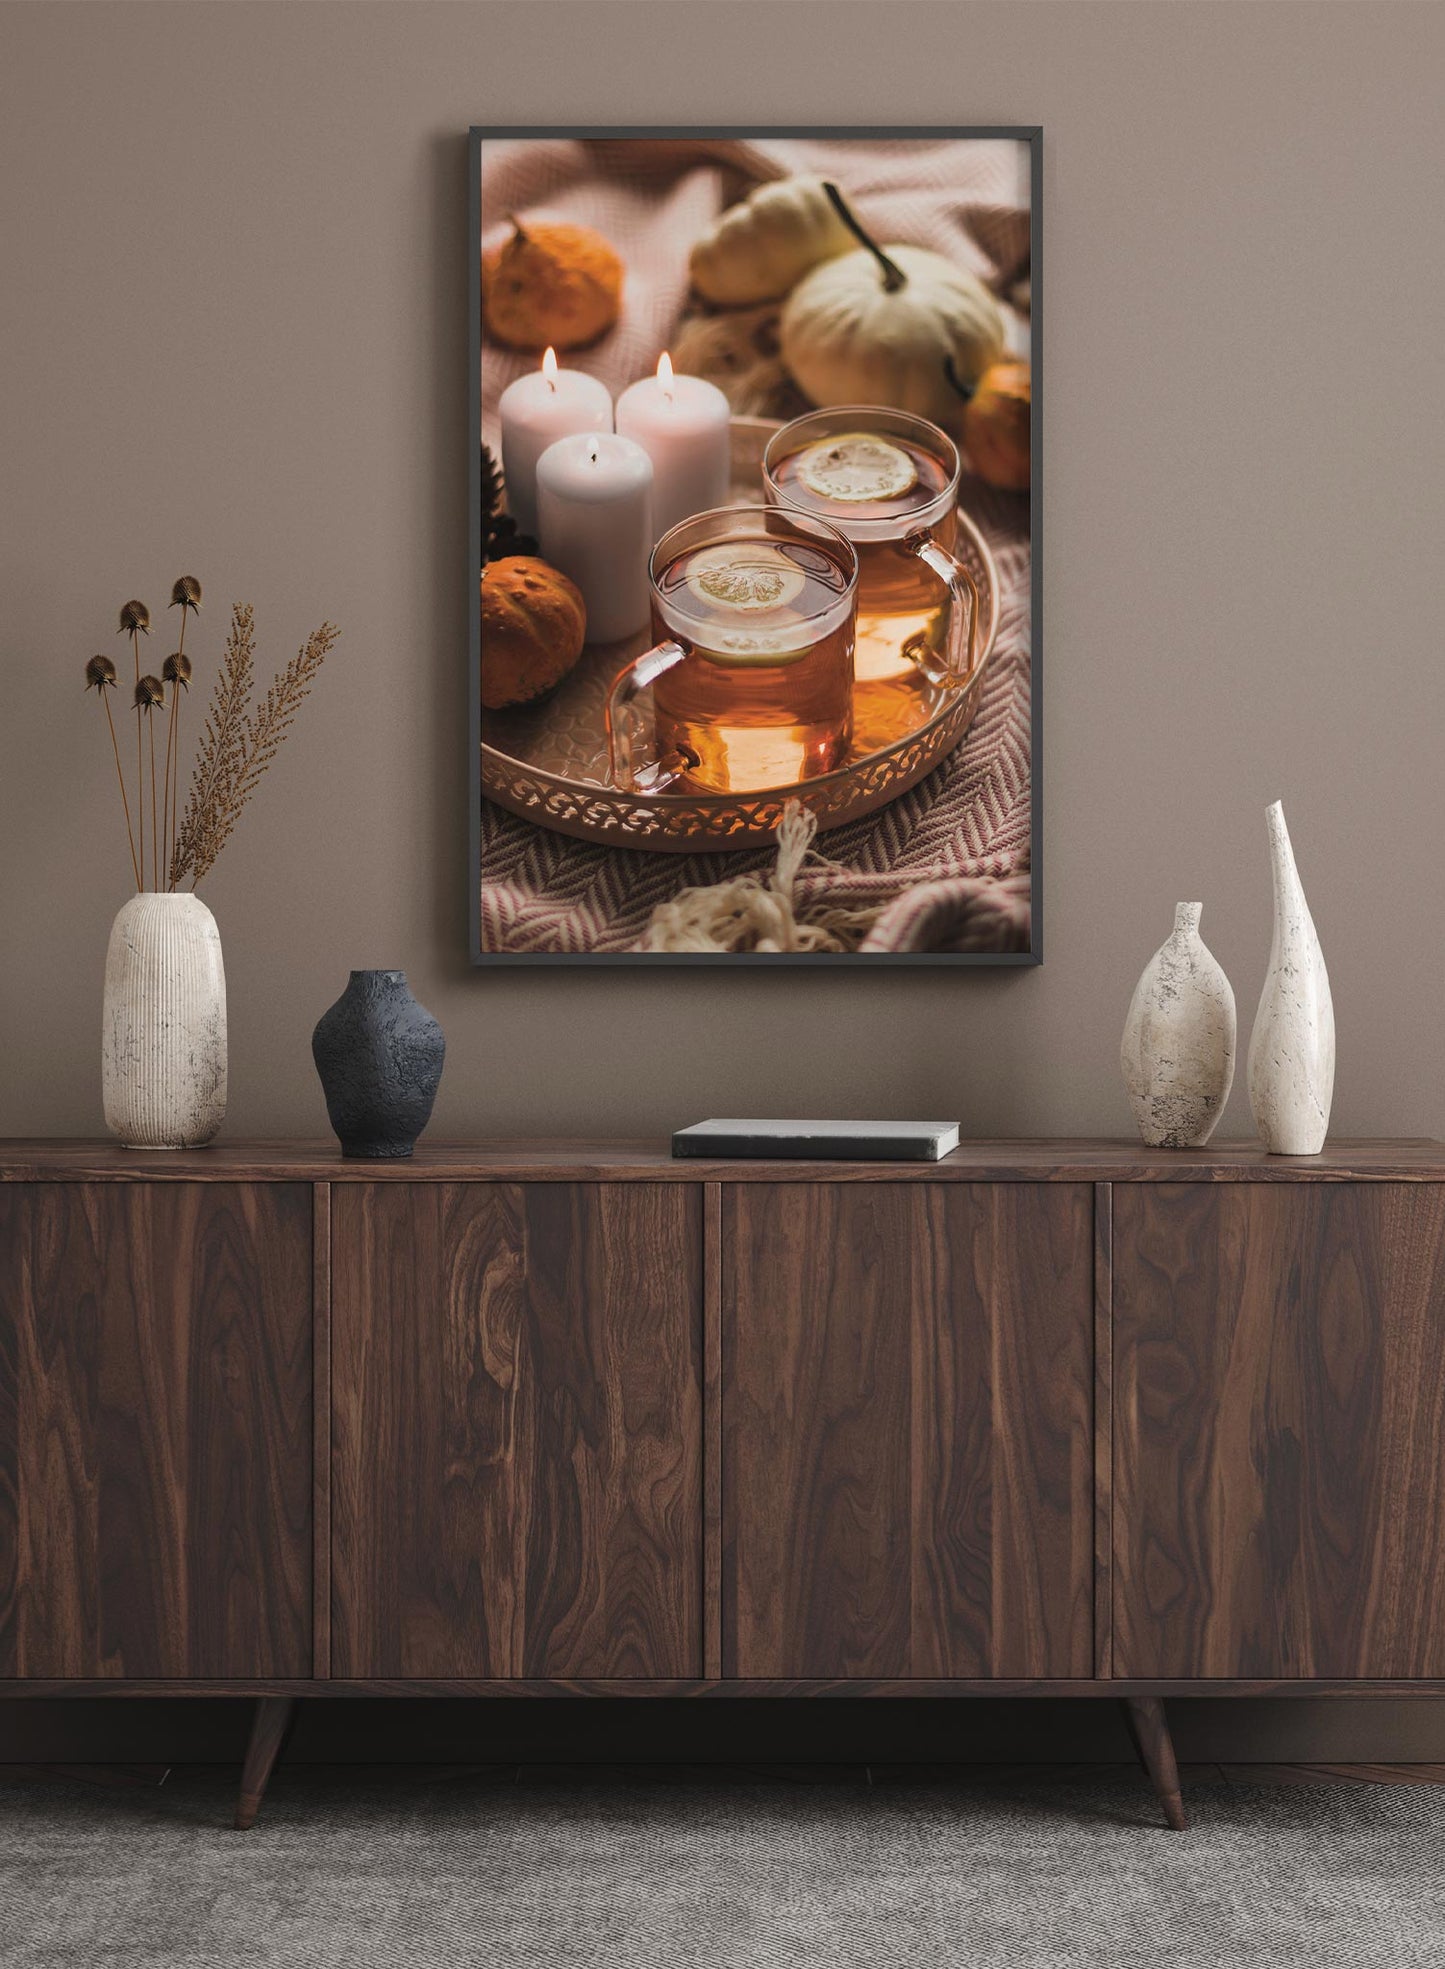 Hug in a Cup is a minimalist photography by Opposite Wall of two cups on lemon tea next to three candles with pumpkins in the background.